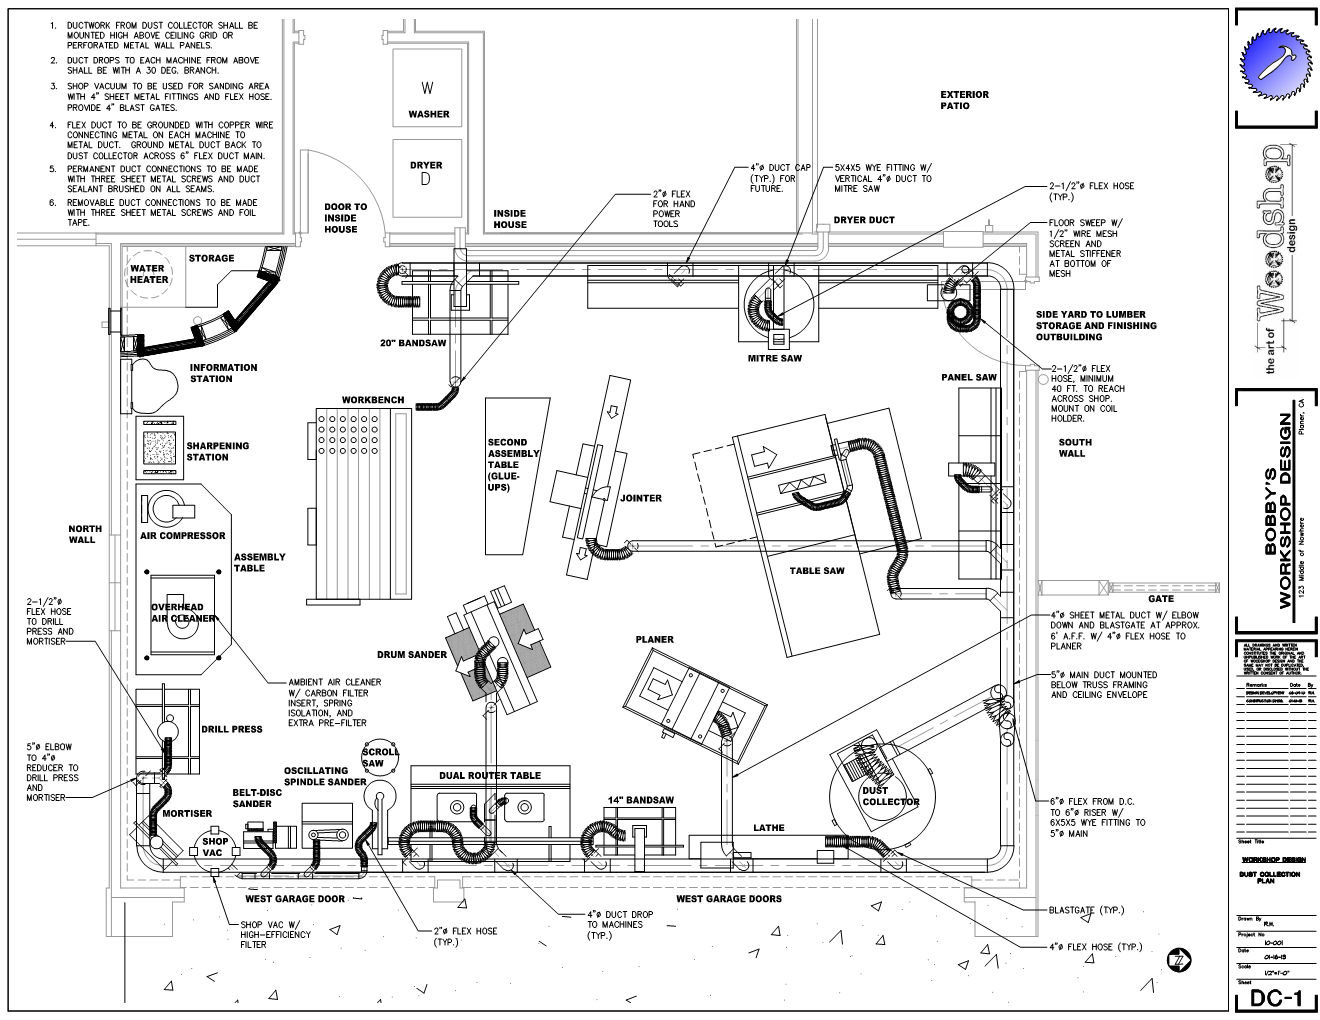 Dust Collector System Layout Strategeries The Art Of Woodshop Design